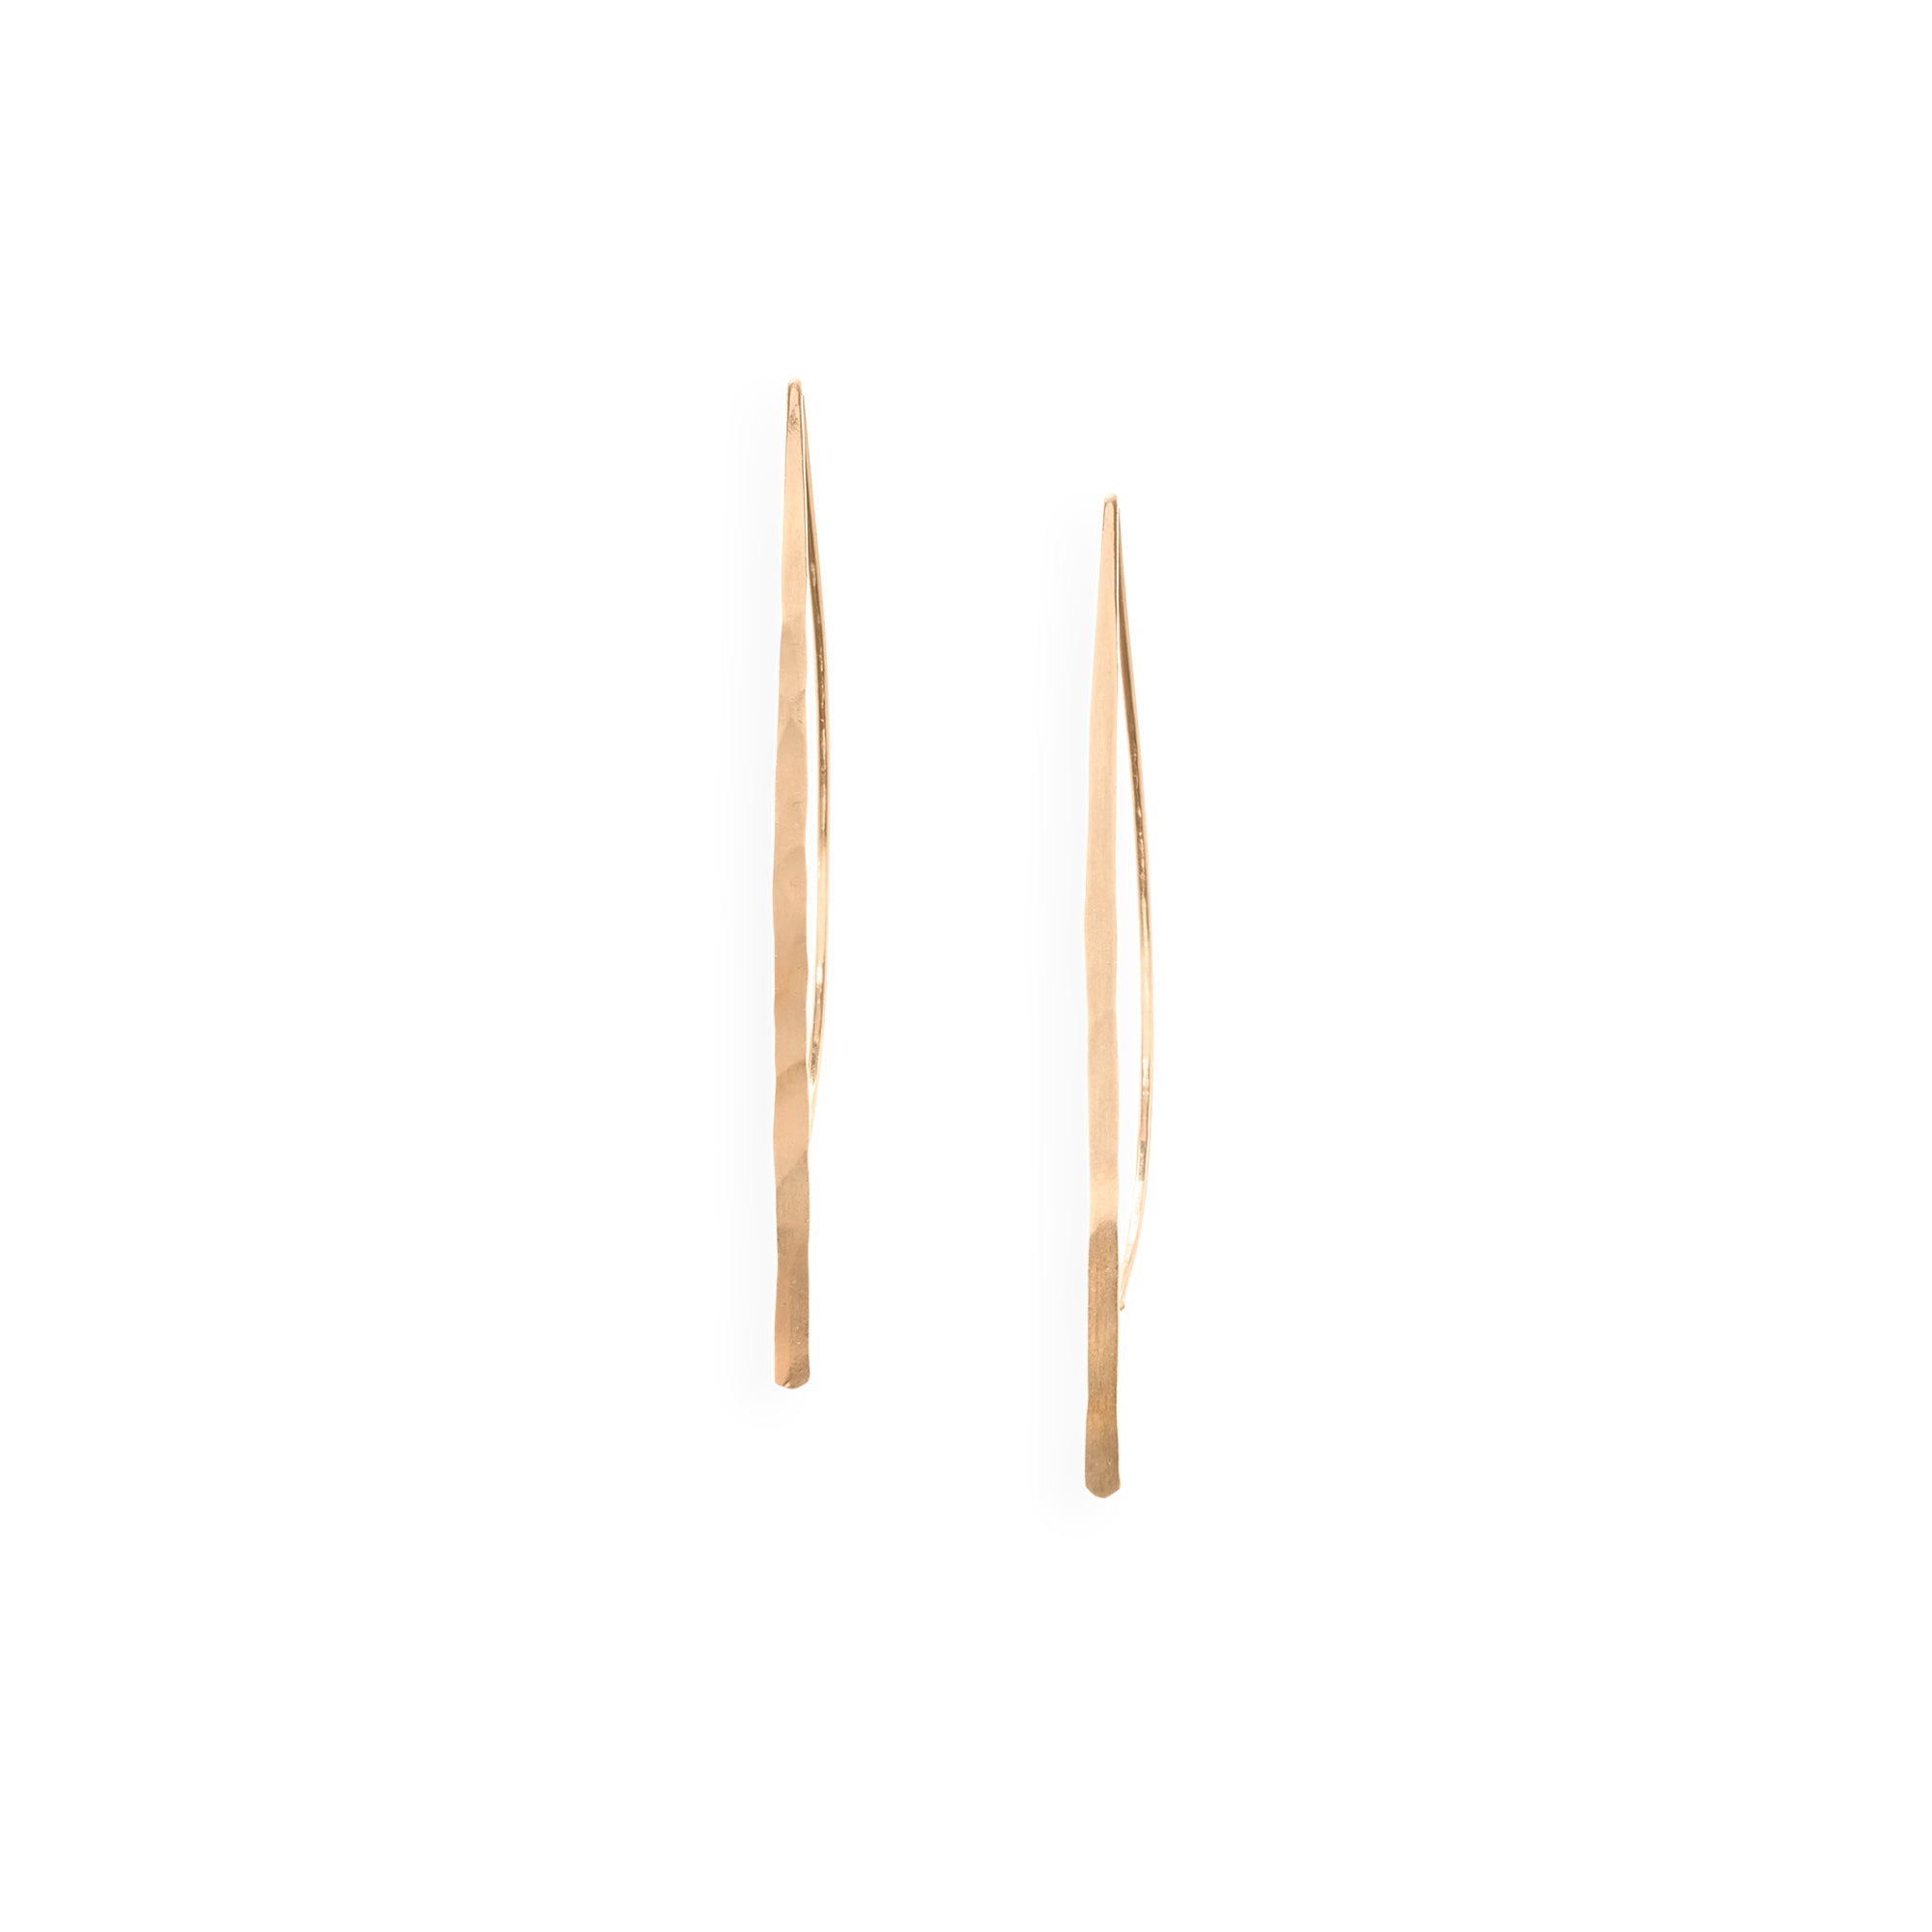 14k gold Bow Hook, delicate threader earrings feature a forged wire front and an arch that hangs behind the earlobe